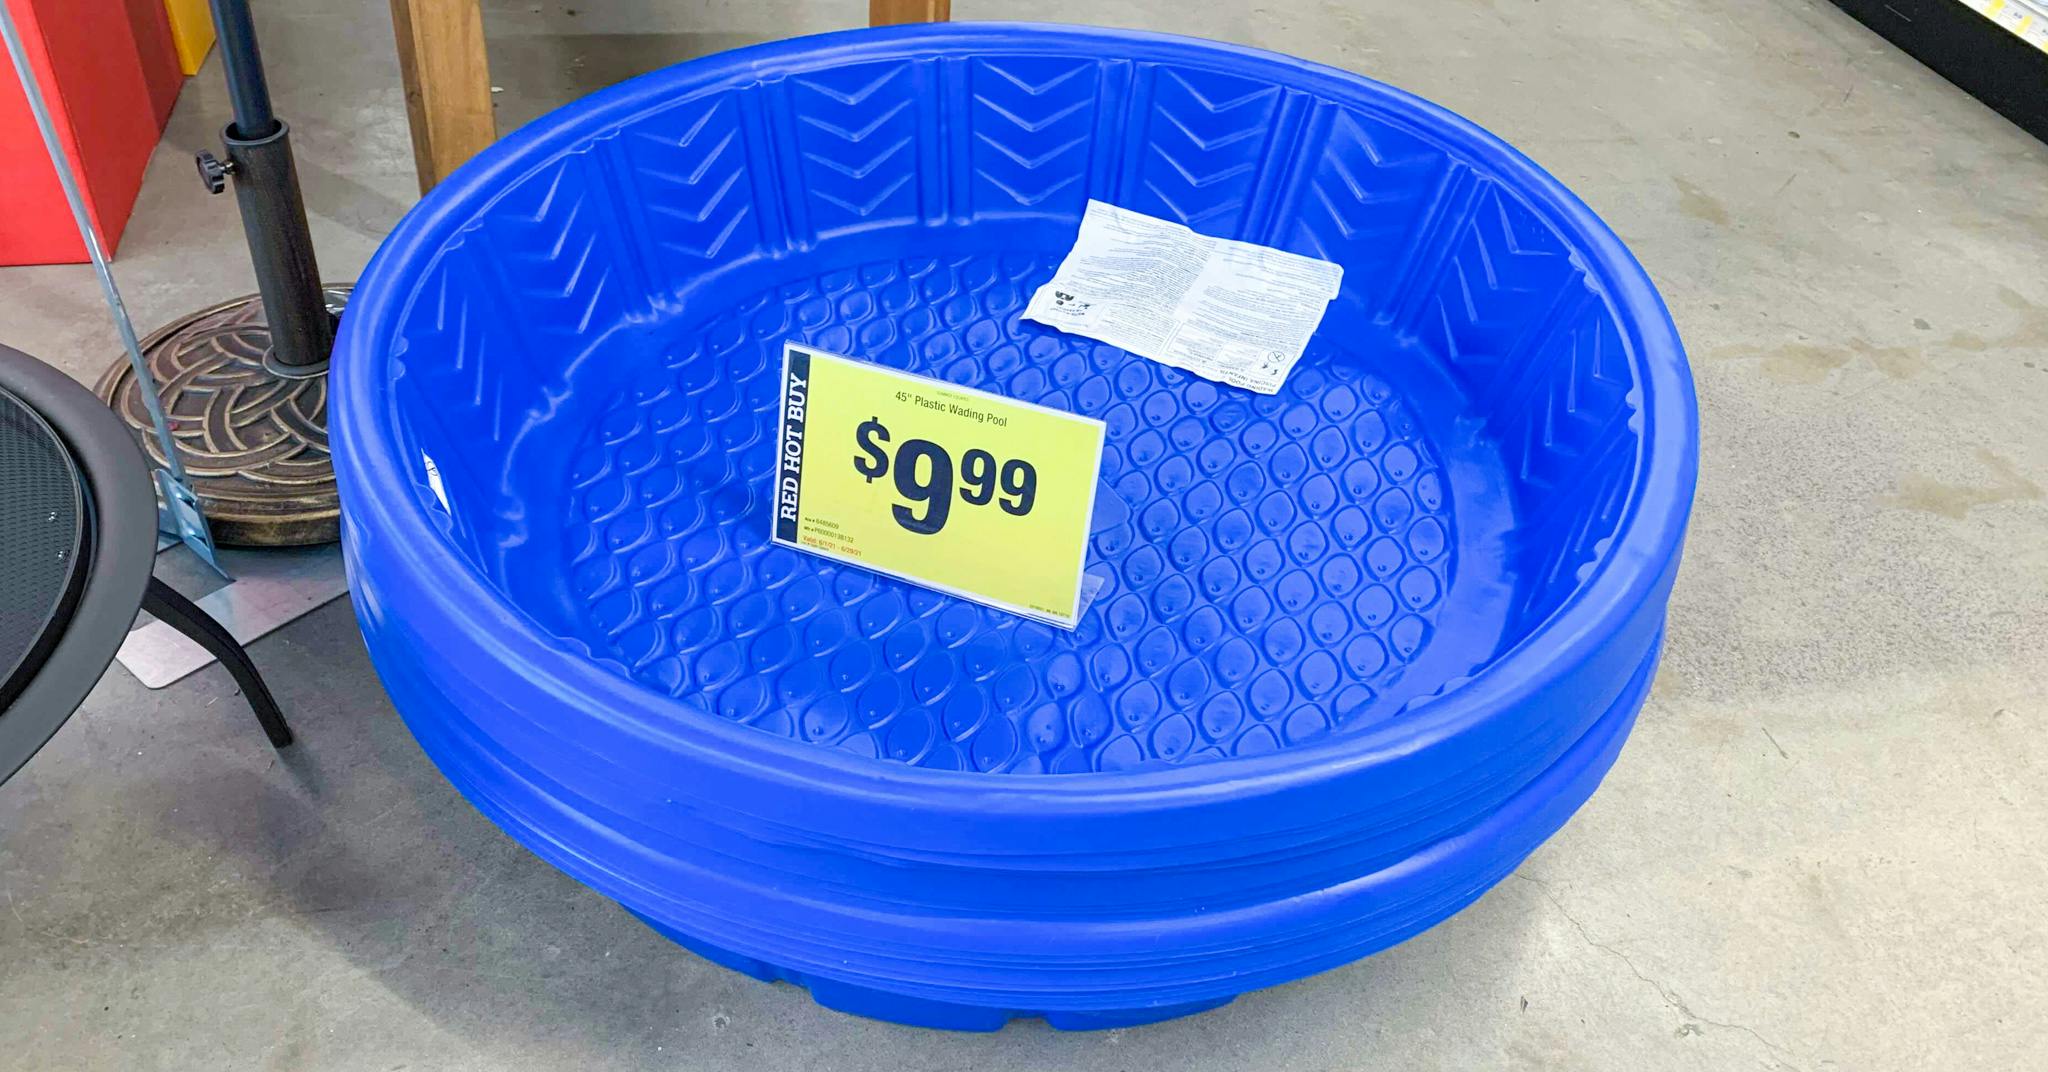 Plastic Kiddie Pool, Only $10 at Ace Hardware - The Krazy Coupon Lady